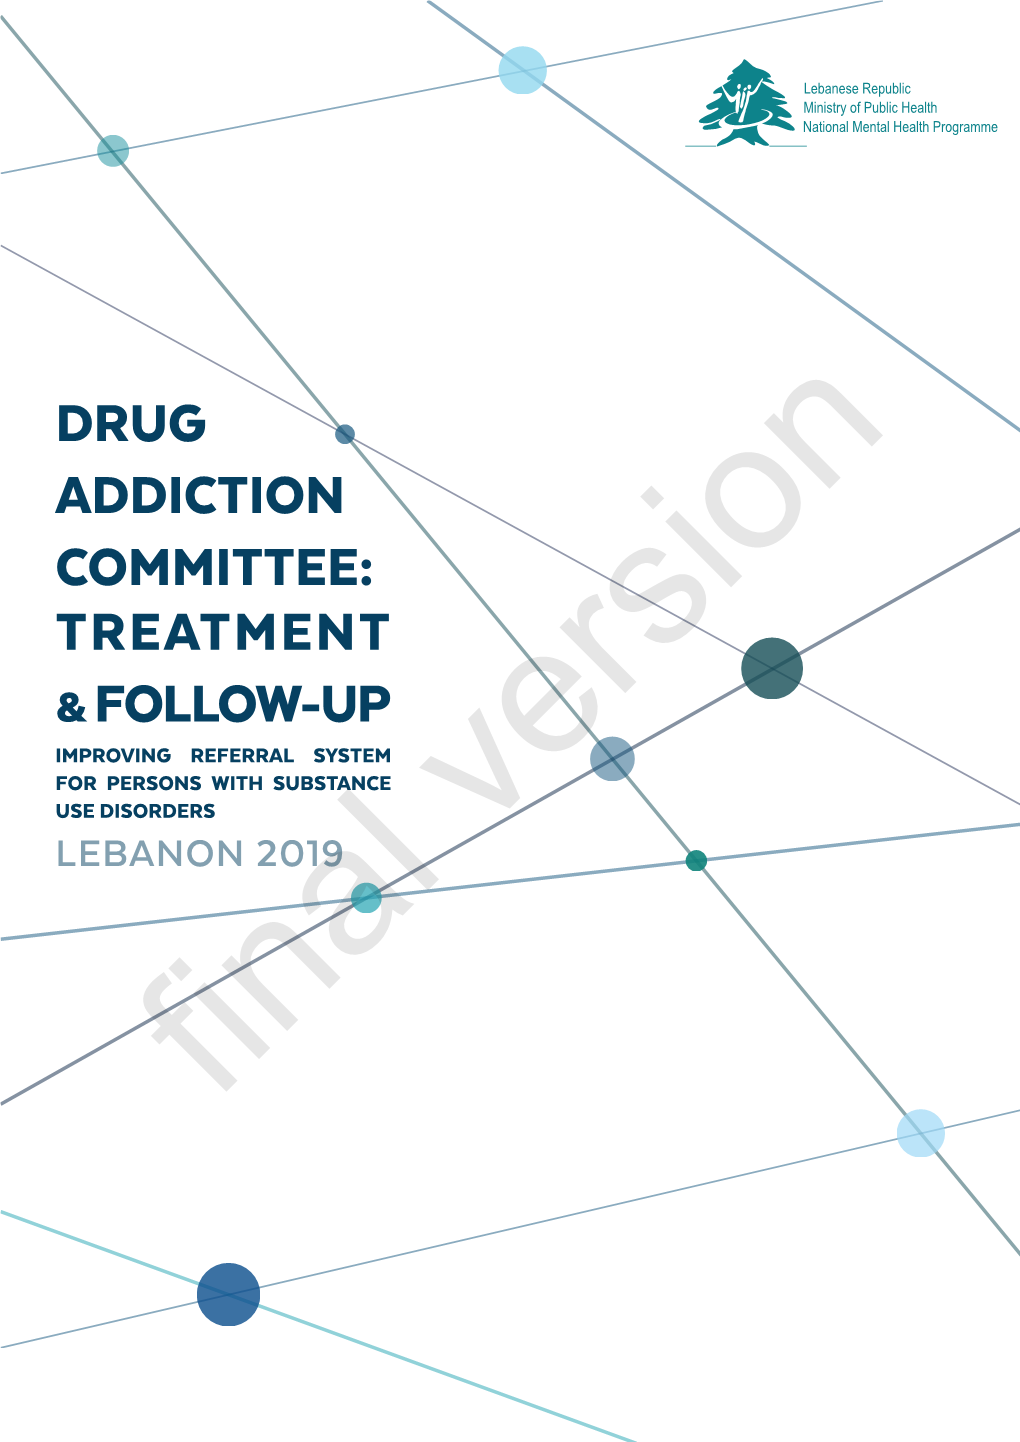 DRUG ADDICTION COMMITTEE: TREATMENT & FOLLOW-UP IMPROVING REFERRAL SYSTEM for PERSONS with SUBSTANCE USE DISORDERS LEBANON 2019 Version